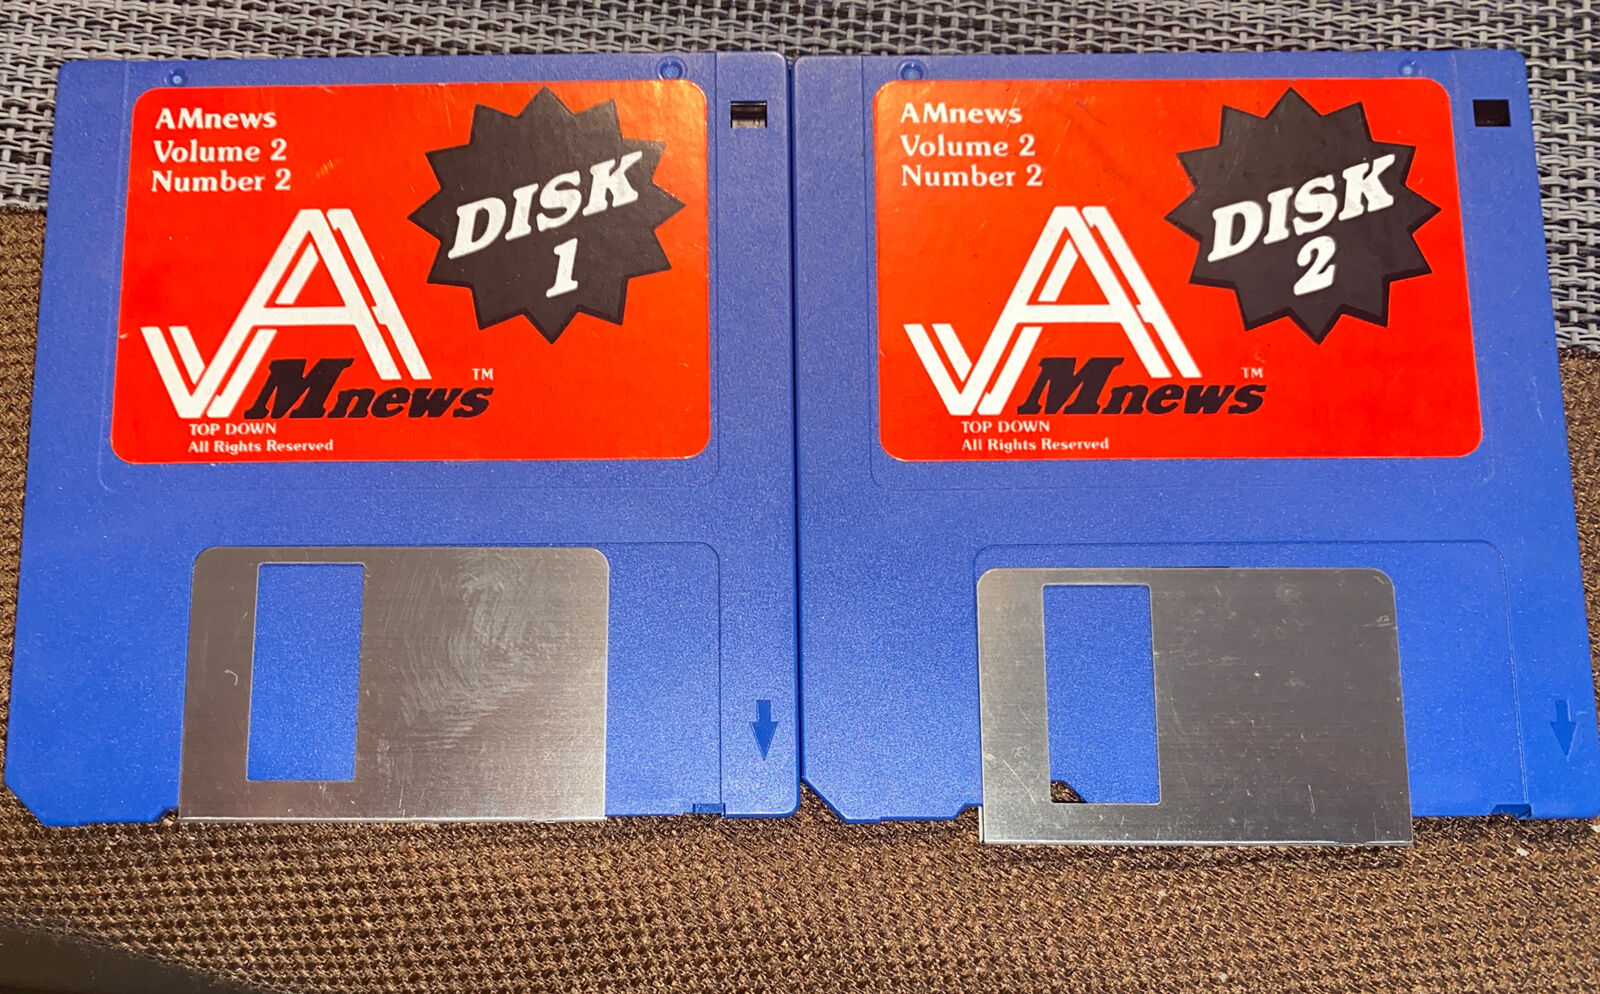 VINTAGE 1985 AM NEWS DISK 1 AND DISK 2 - FOR COMMODORE AMIGA LOOK